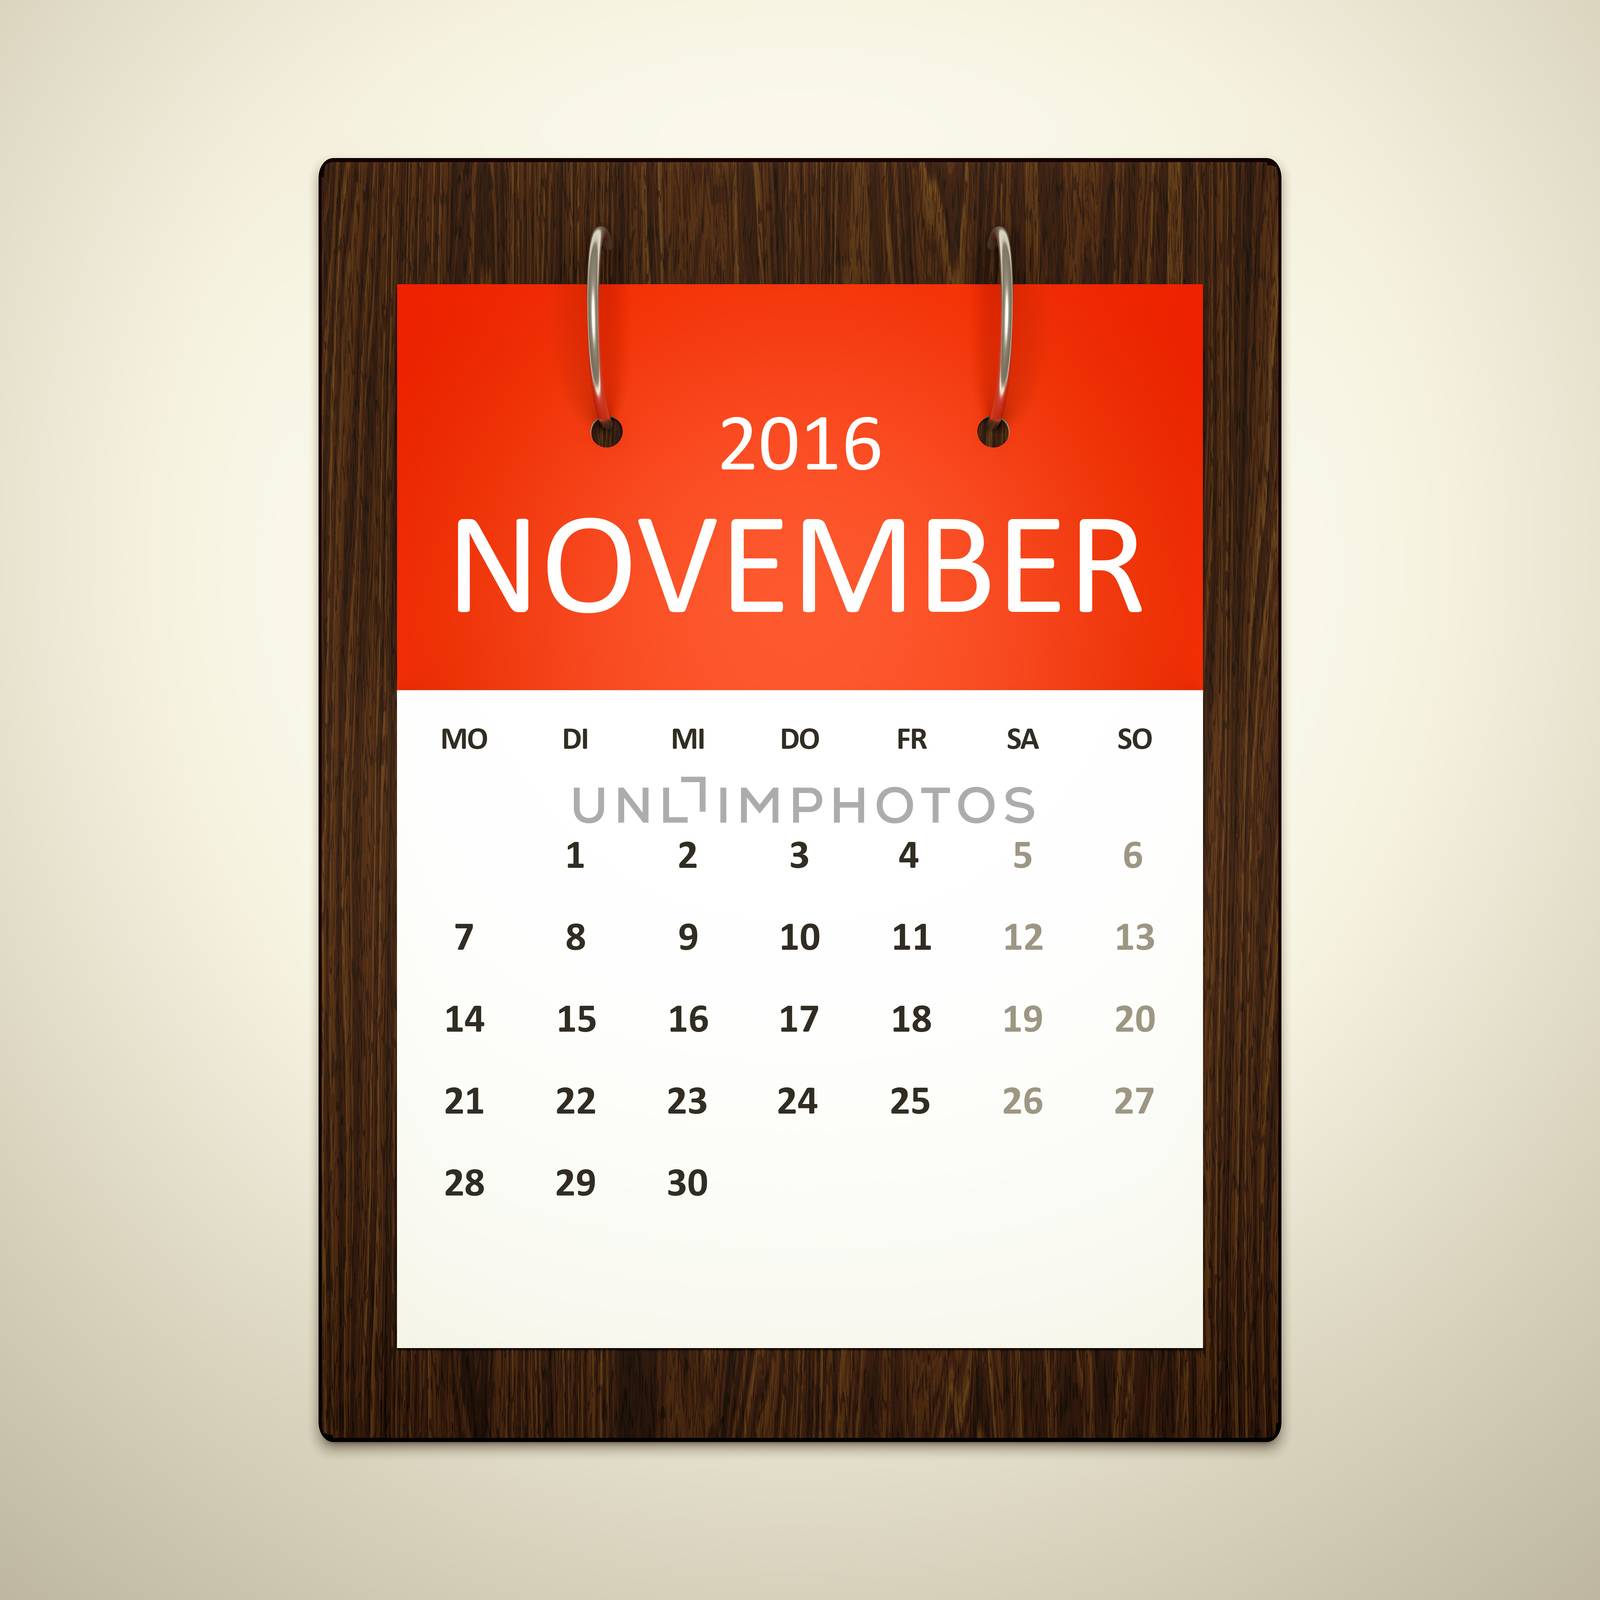 An image of a german calendar for event planning 2016 november